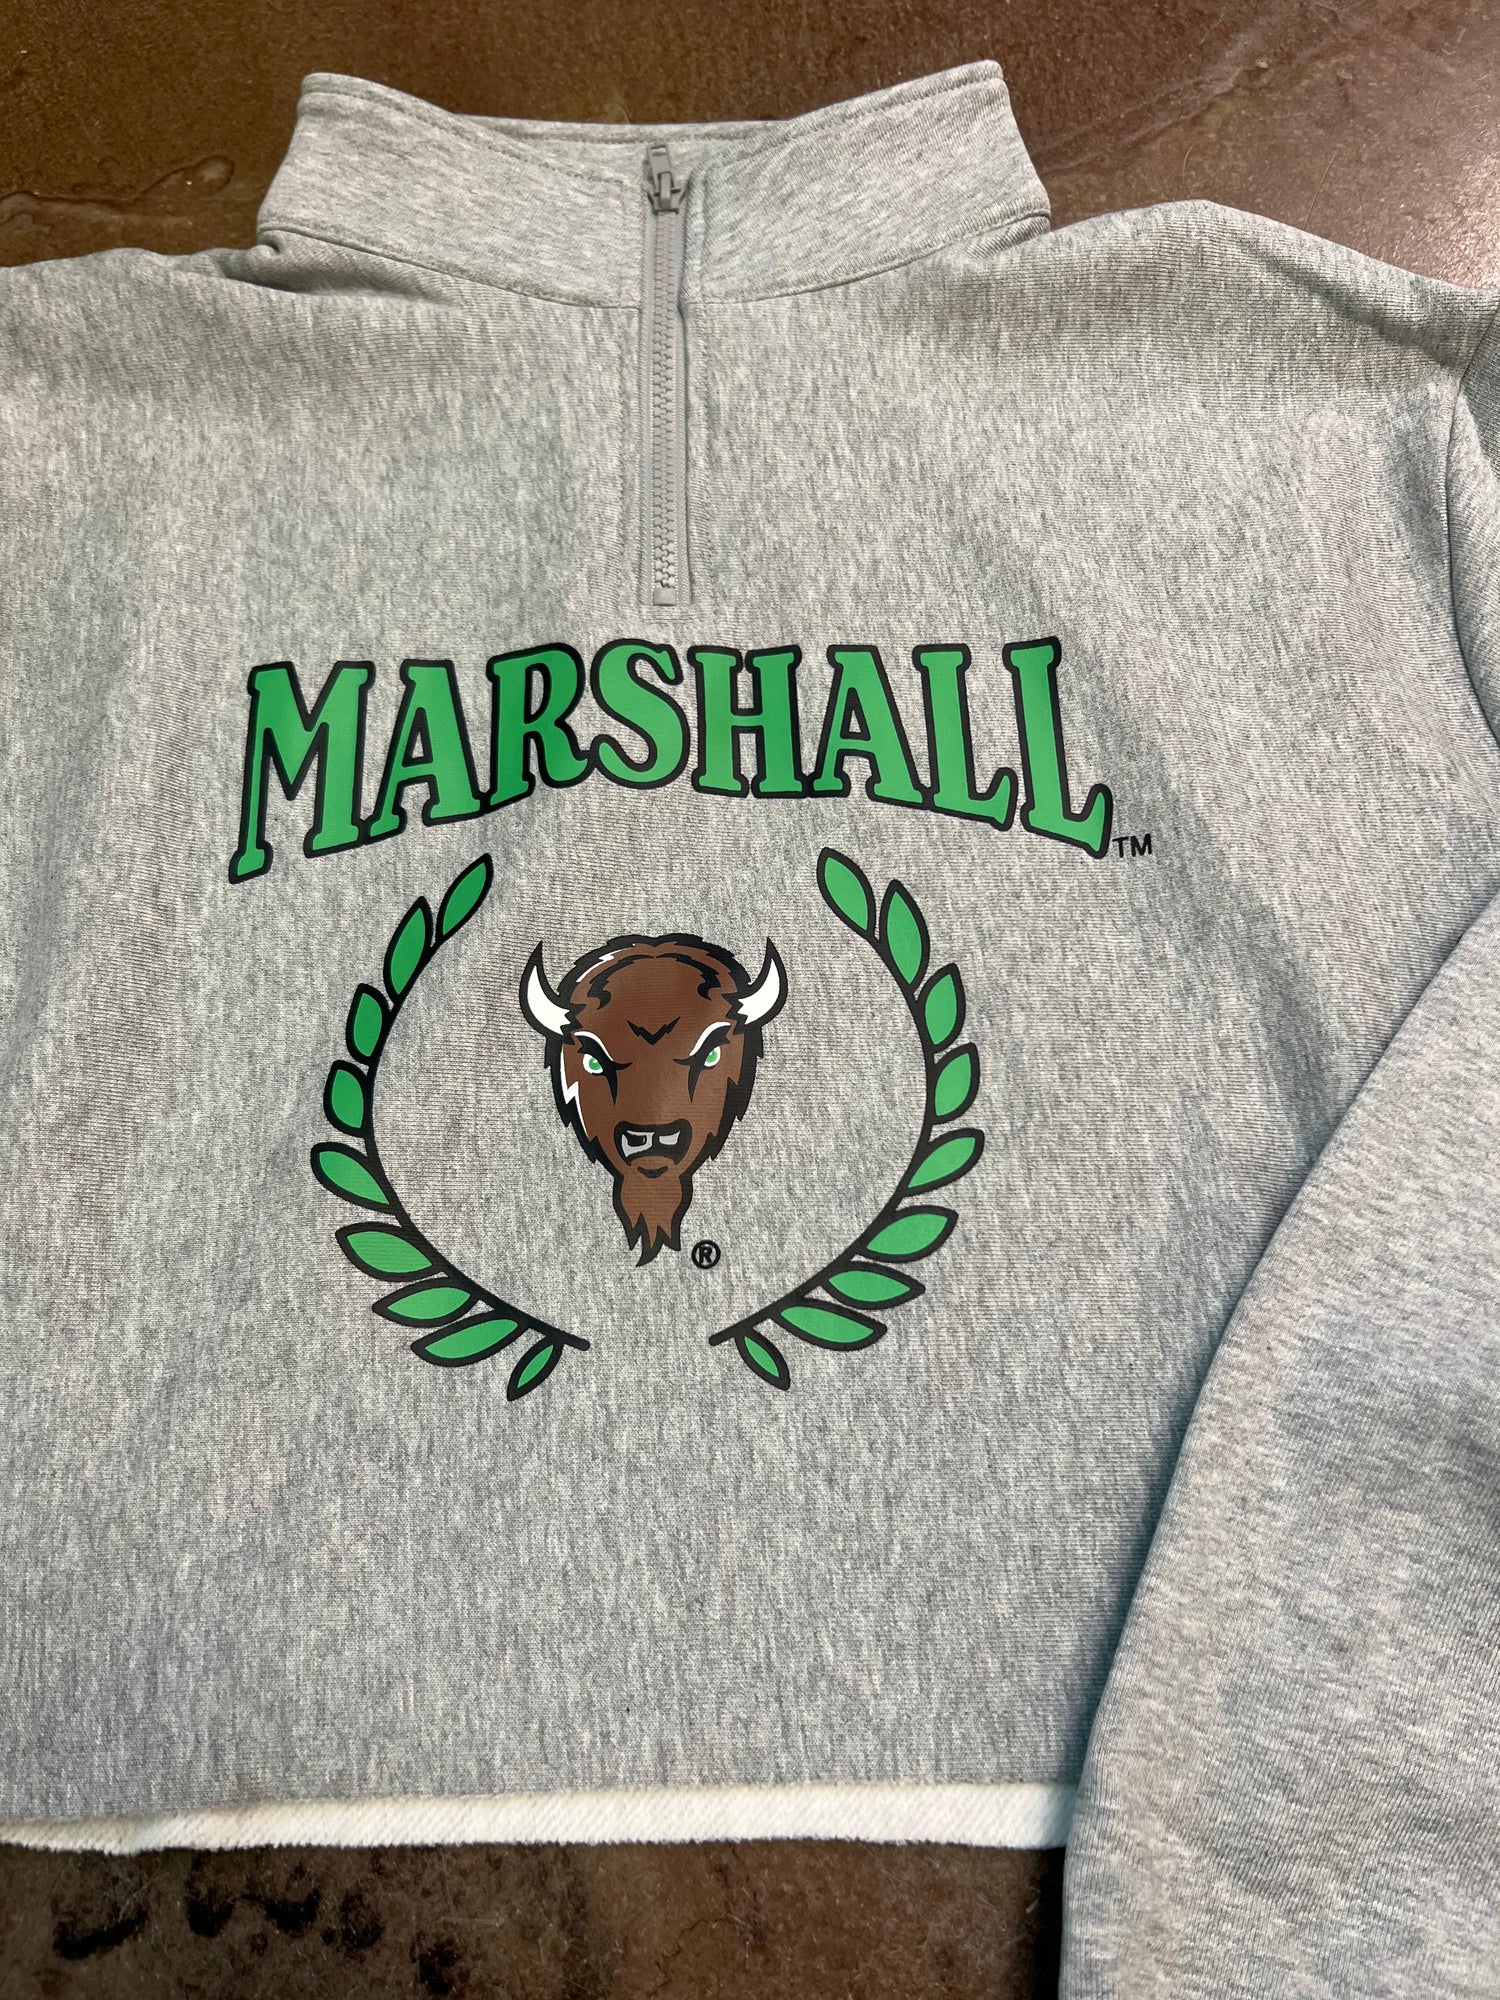 GRAY MARSHALL UNIVERSITY CROPPED PULLOVER - THE HIP EAGLE BOUTIQUE